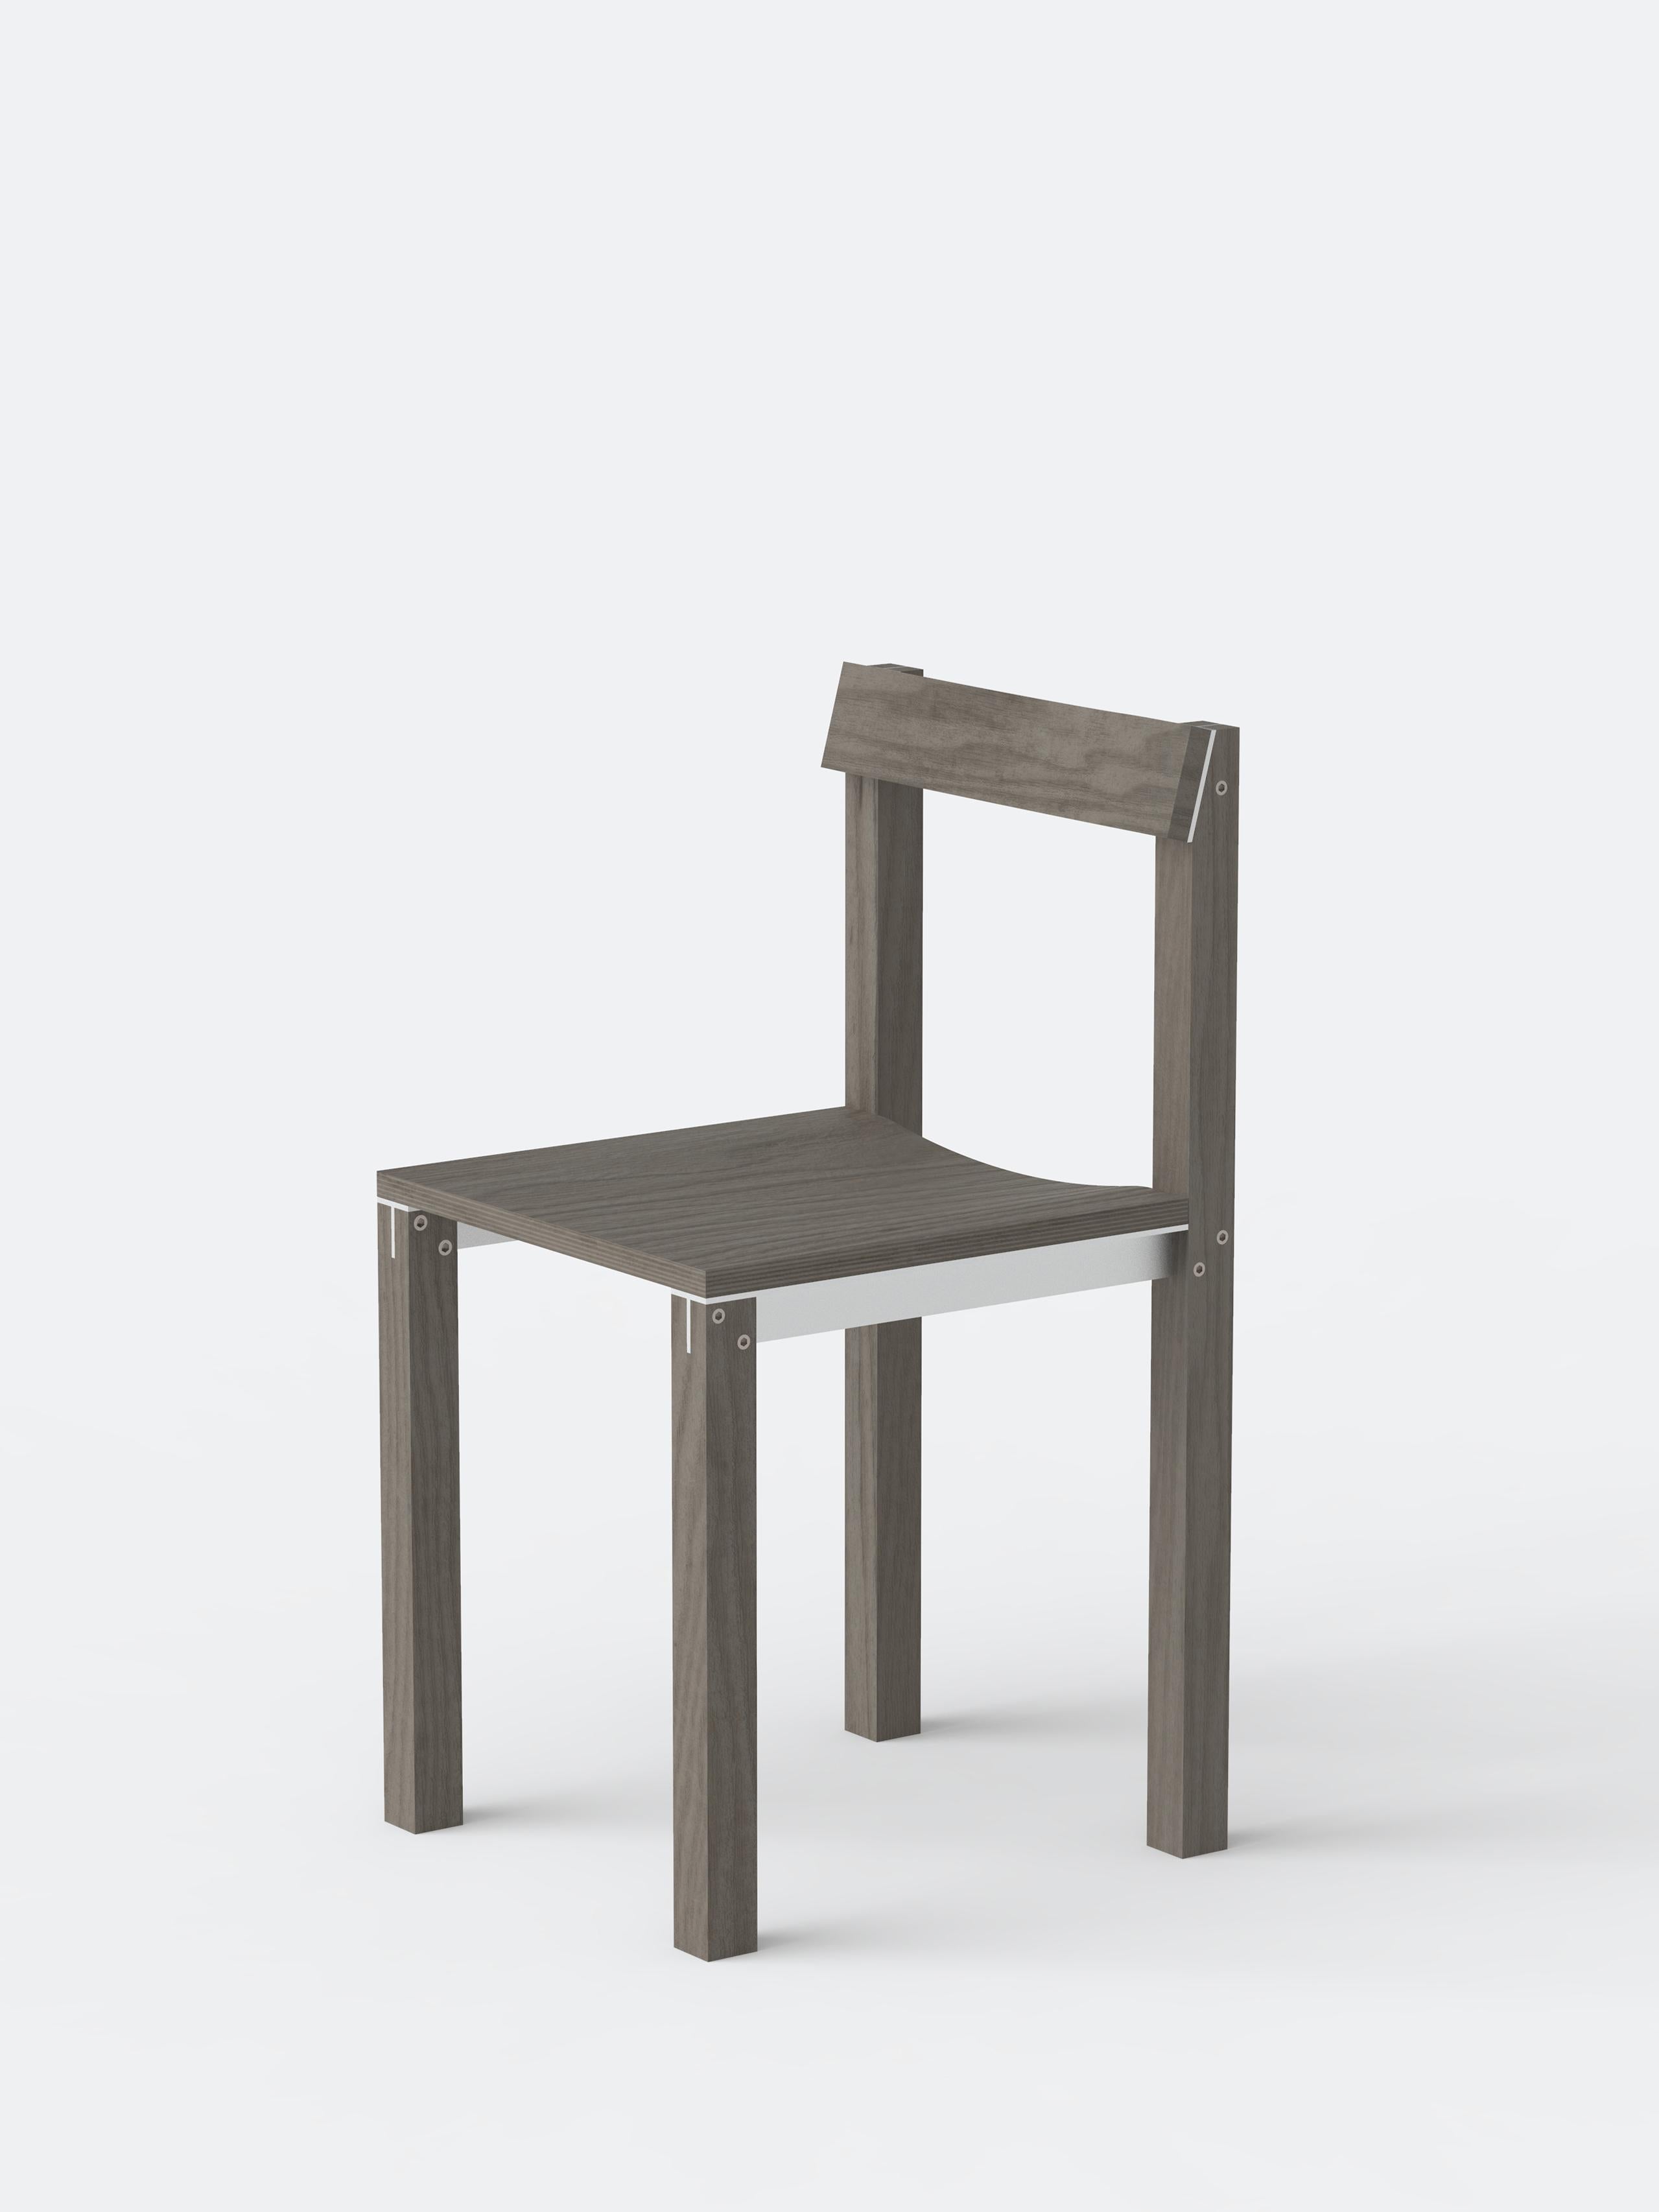 Set of 8 Tal Grey Oak Chairs by Kann Design
Dimensions: D 40 x W 44 x H 80 cm.
Materials: Grey lacquered oak, aluminum.
Available in other finishes.

The Tal chair designed by Léonard Kadid is made of aluminium and wood.
The T aluminium profiles